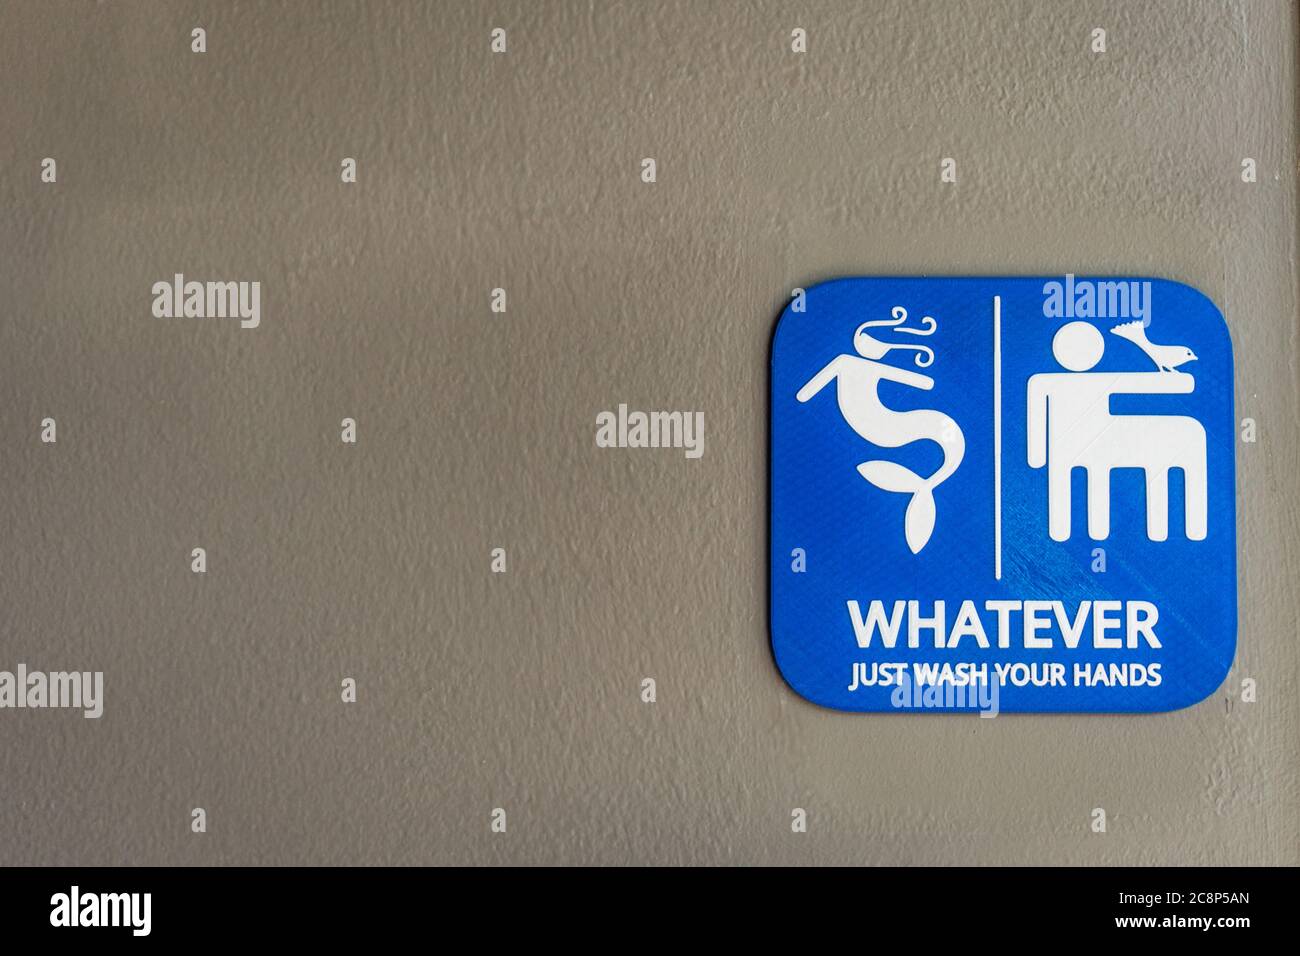 Close-up of bright blue unisex bathroom sign against neutral colored wall. Stock Photo